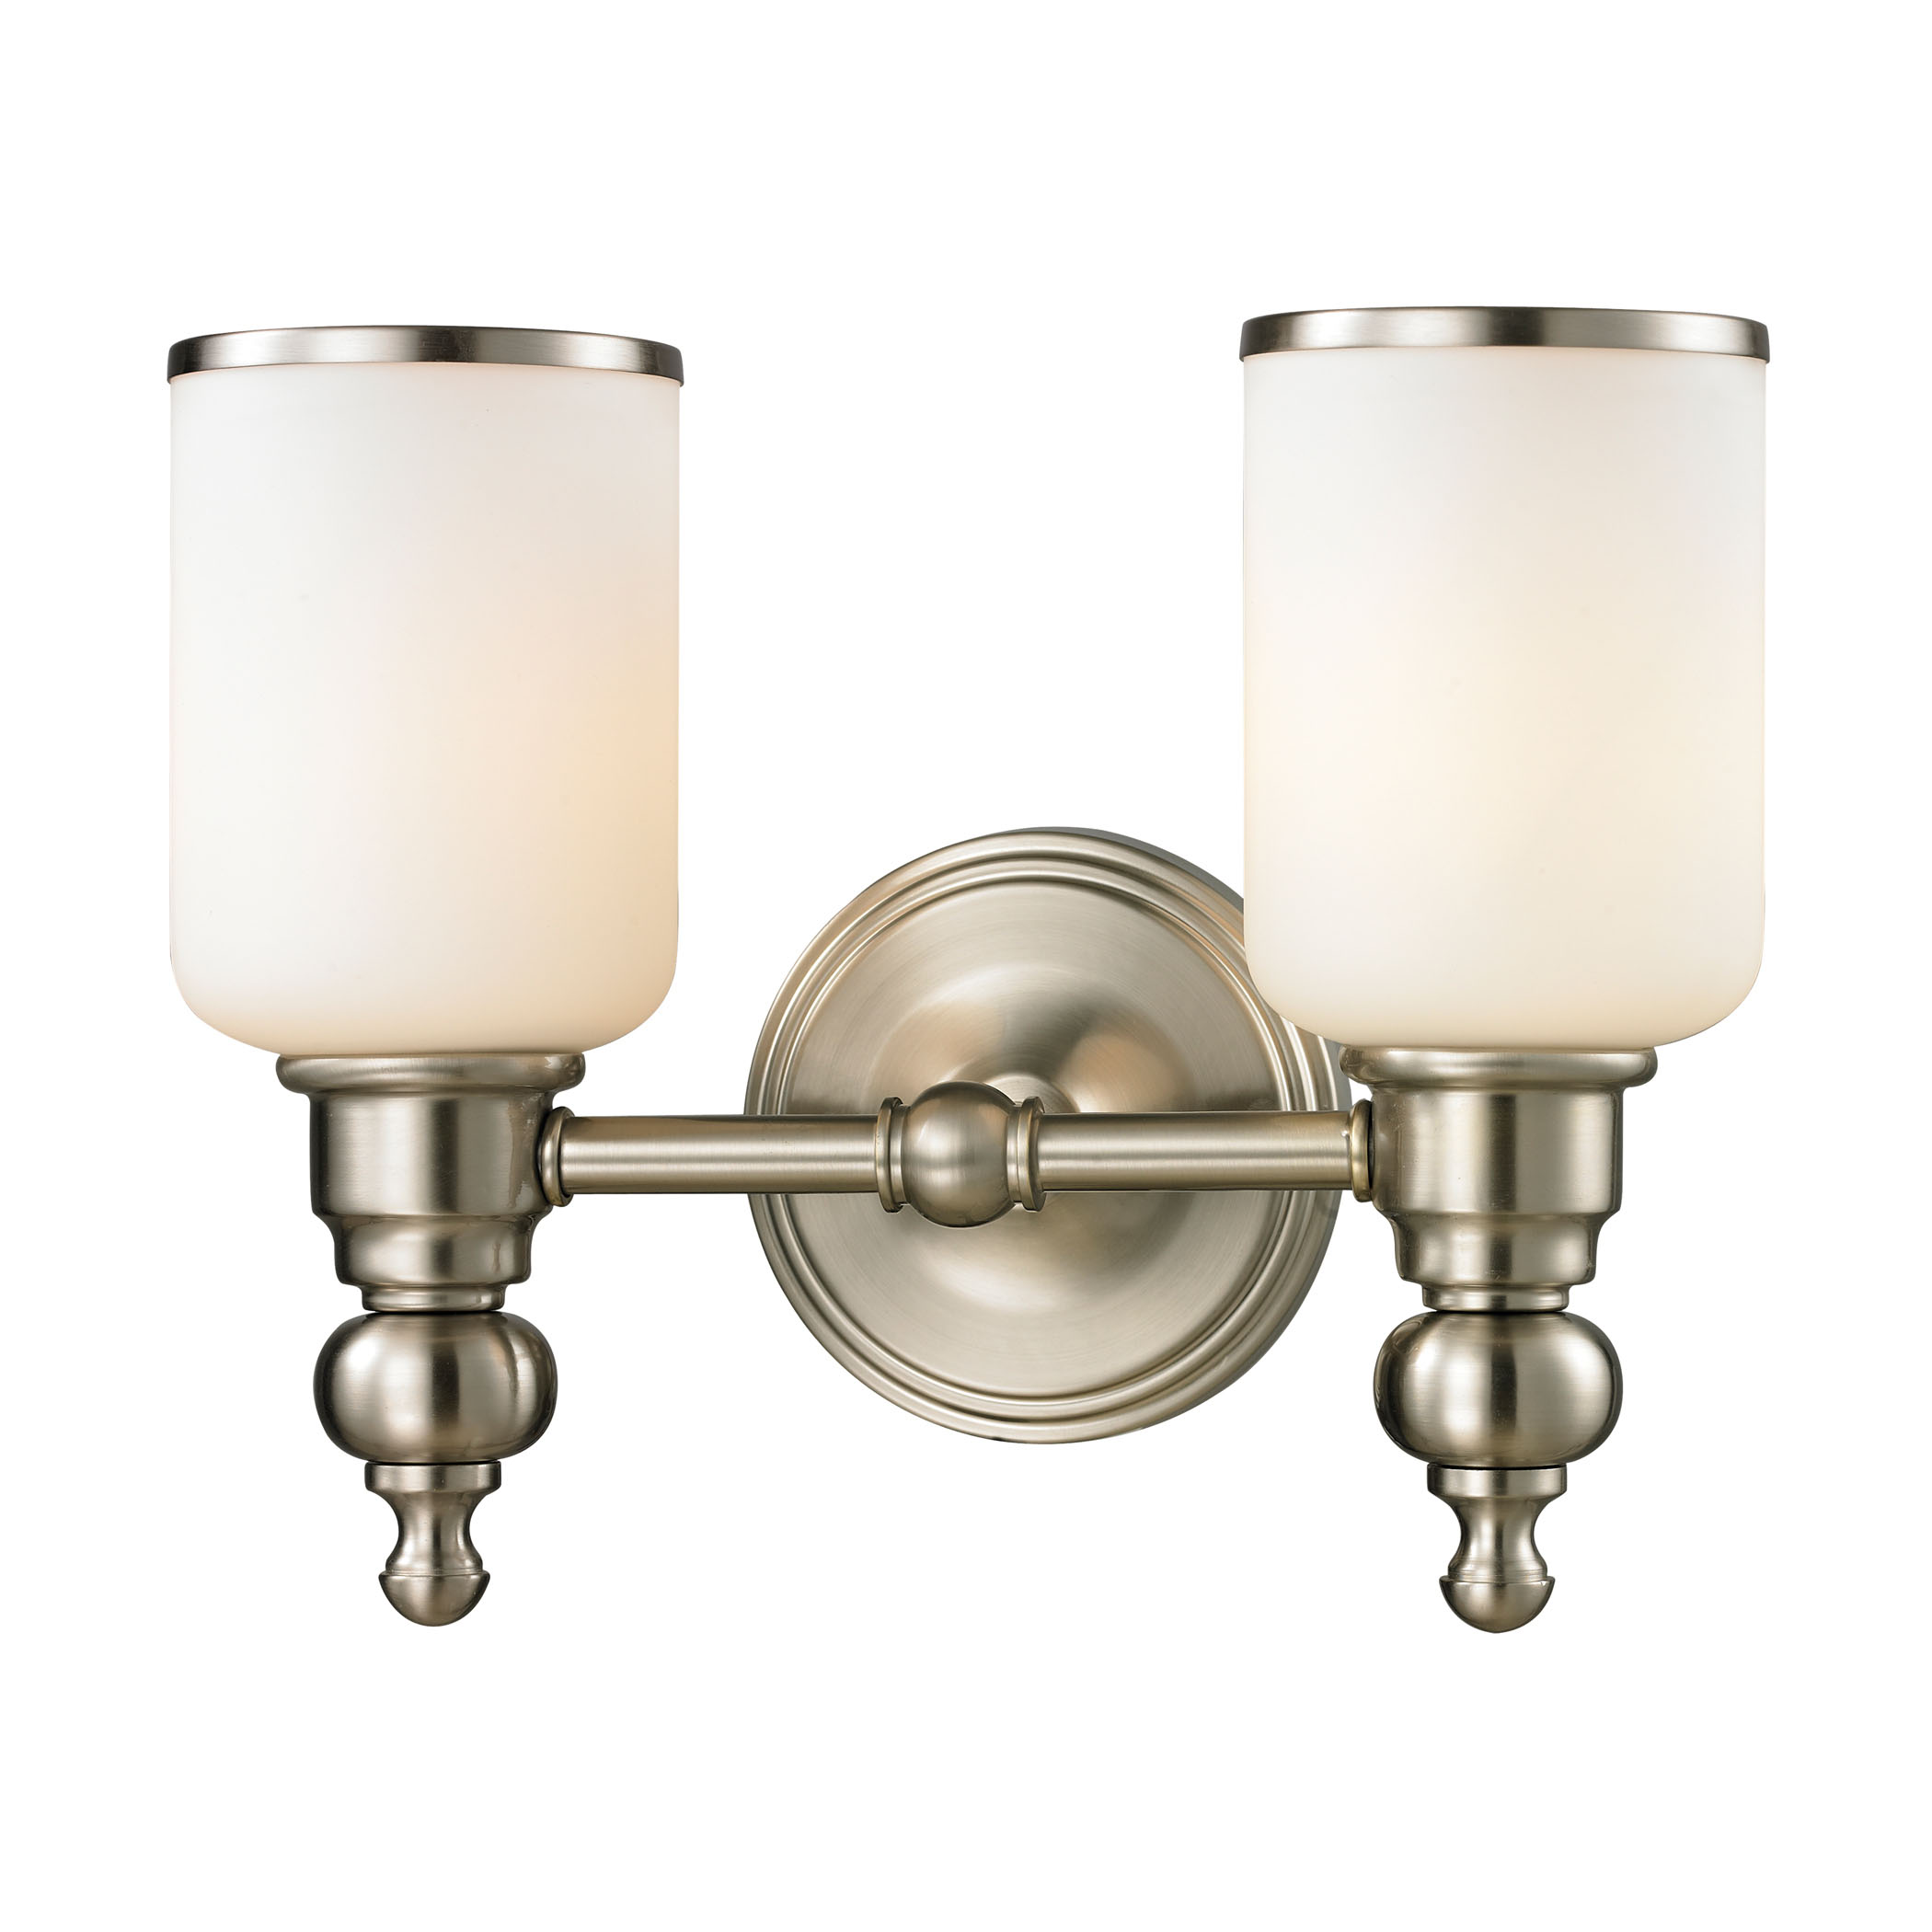 Bristol Collection 2 light bath in Brushed Nickel